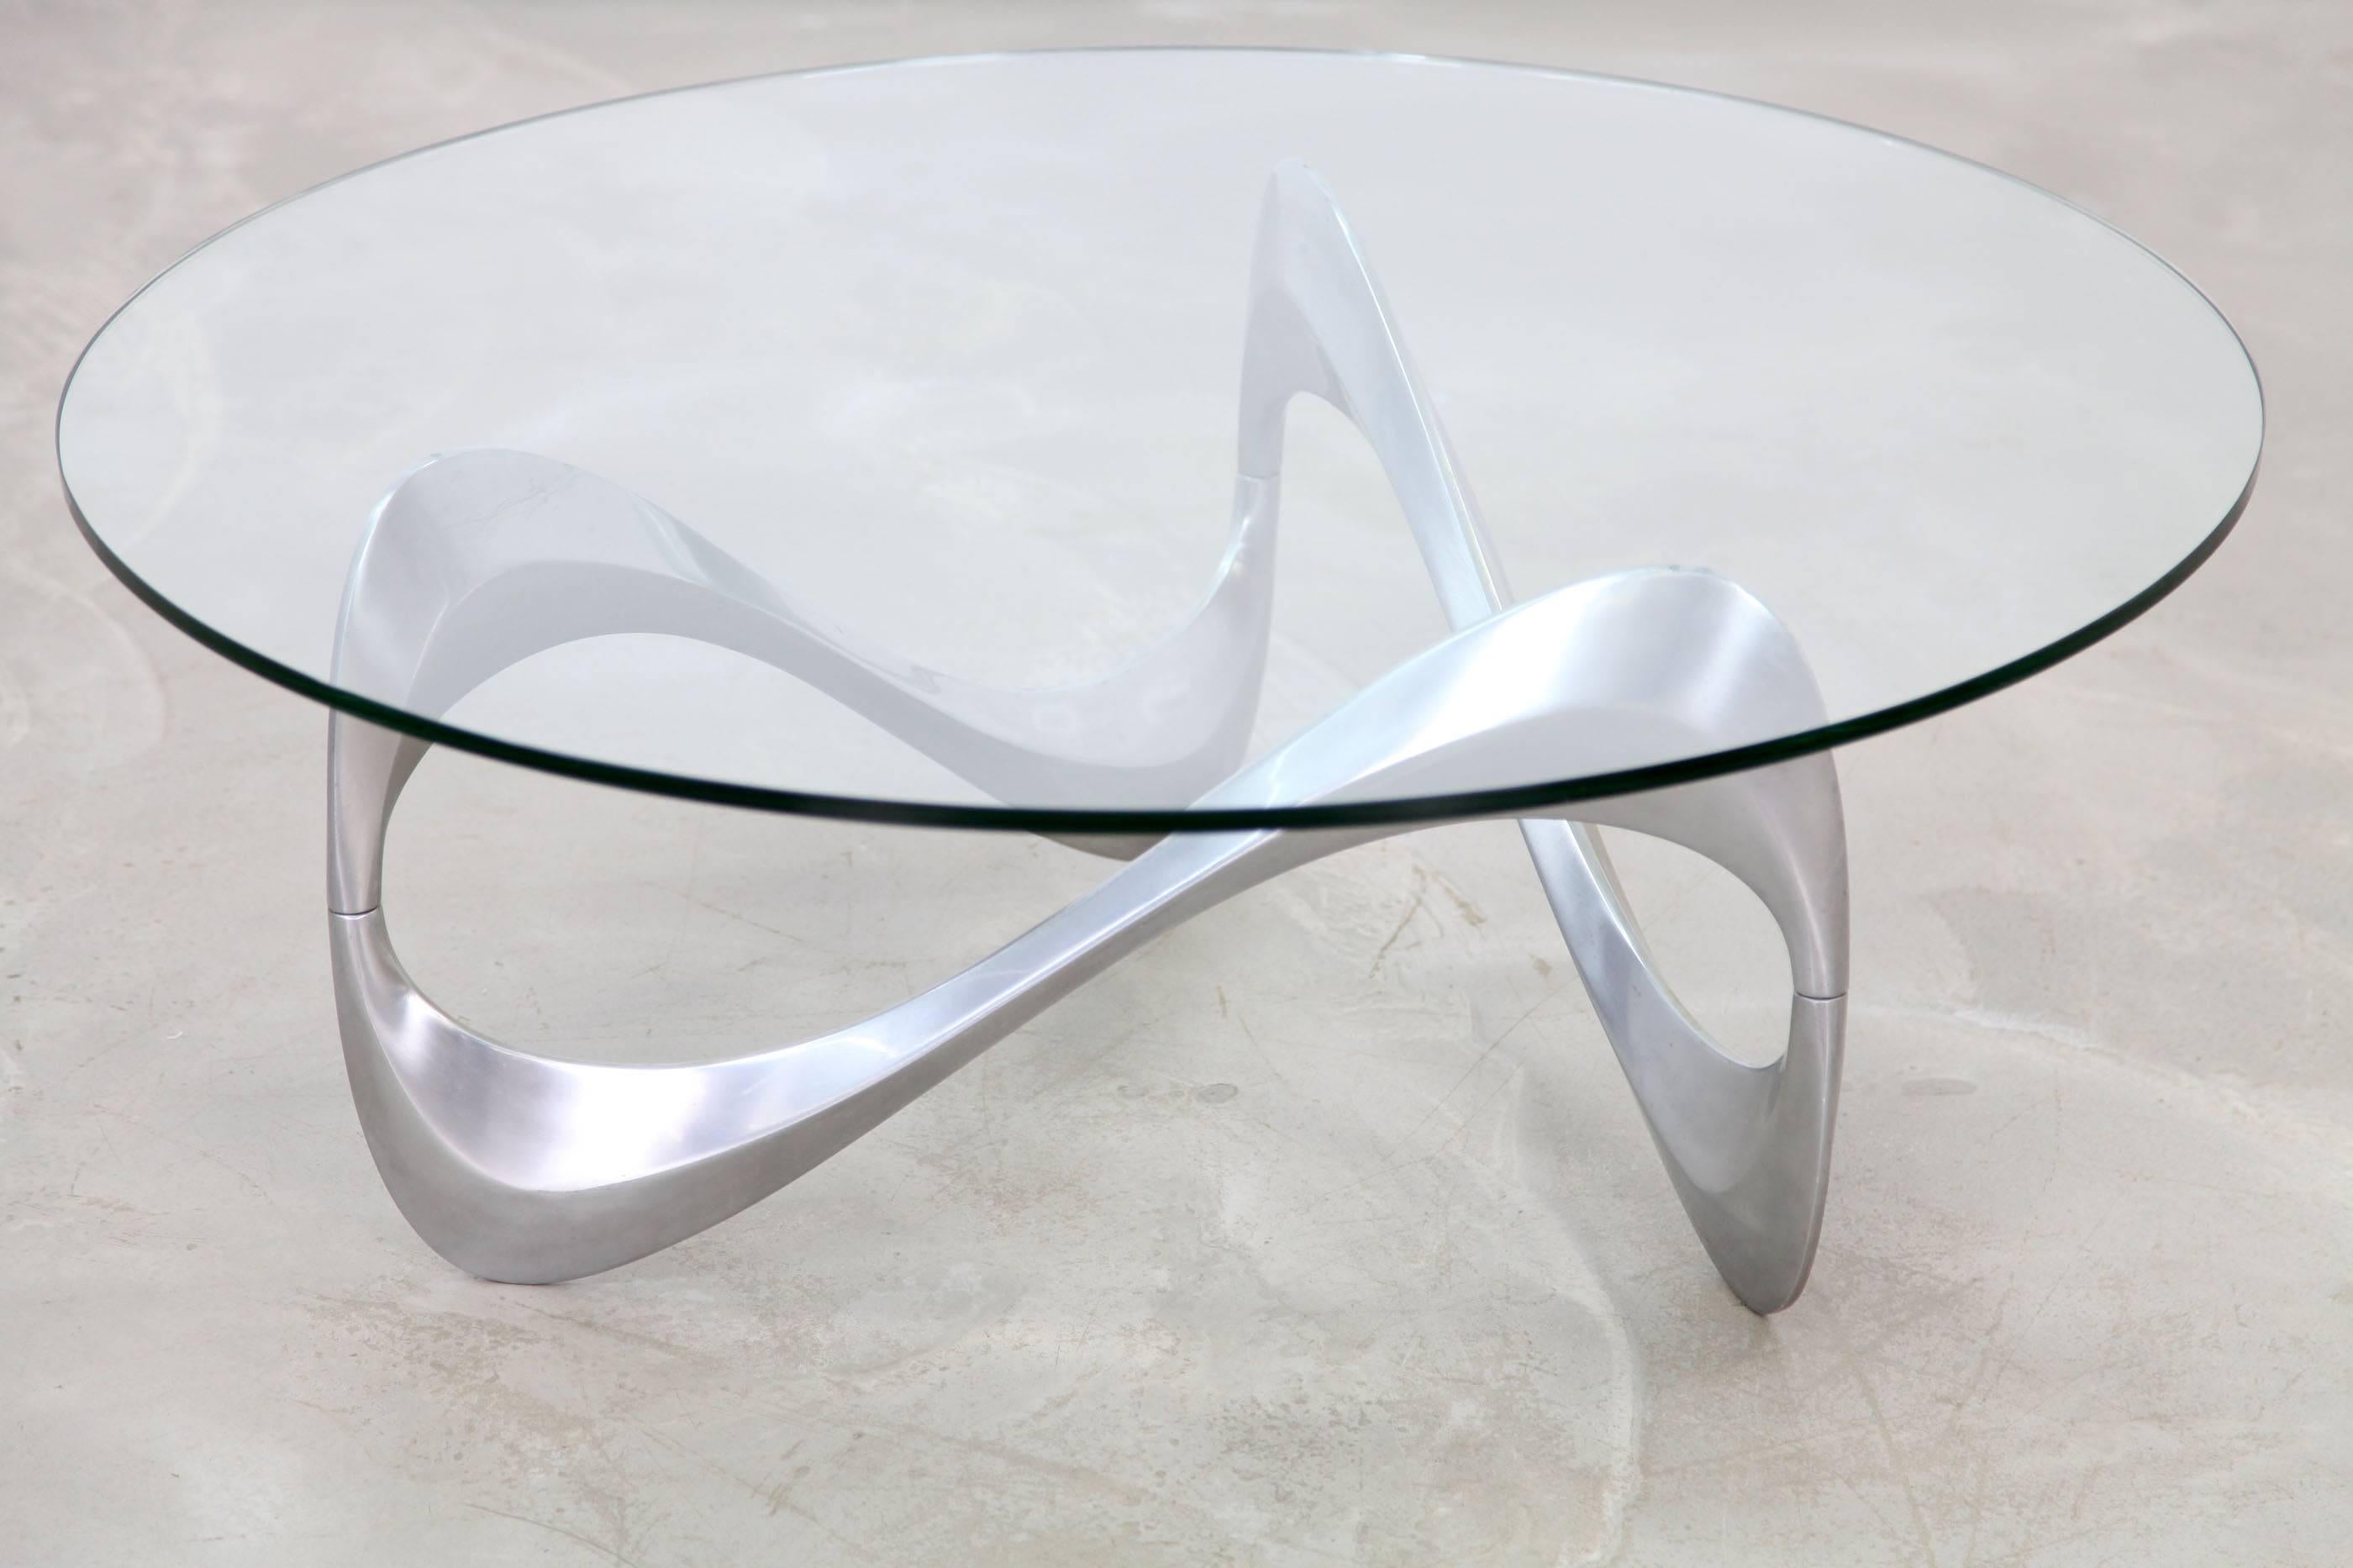 This decorative coffee table by Knut Hesterberg features an aluminum base and thick glass top. Organic design from the 1960s.